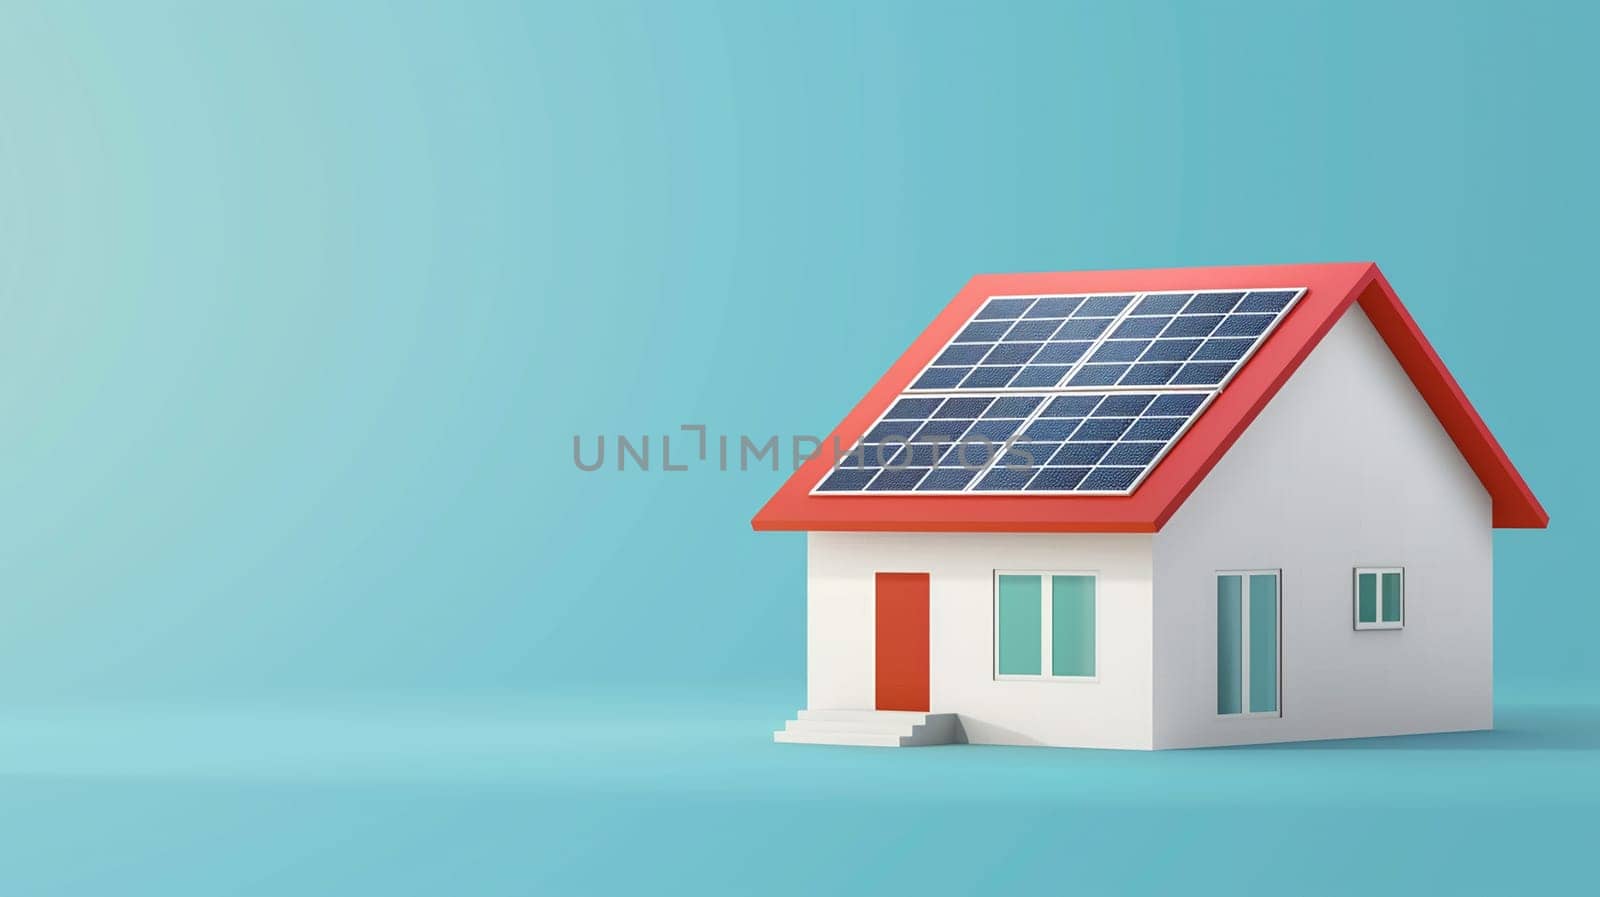 Eco-friendly modern home with efficient solar panel system on roof standing against a clear blue background, symbolizing sustainability and renewable energy.